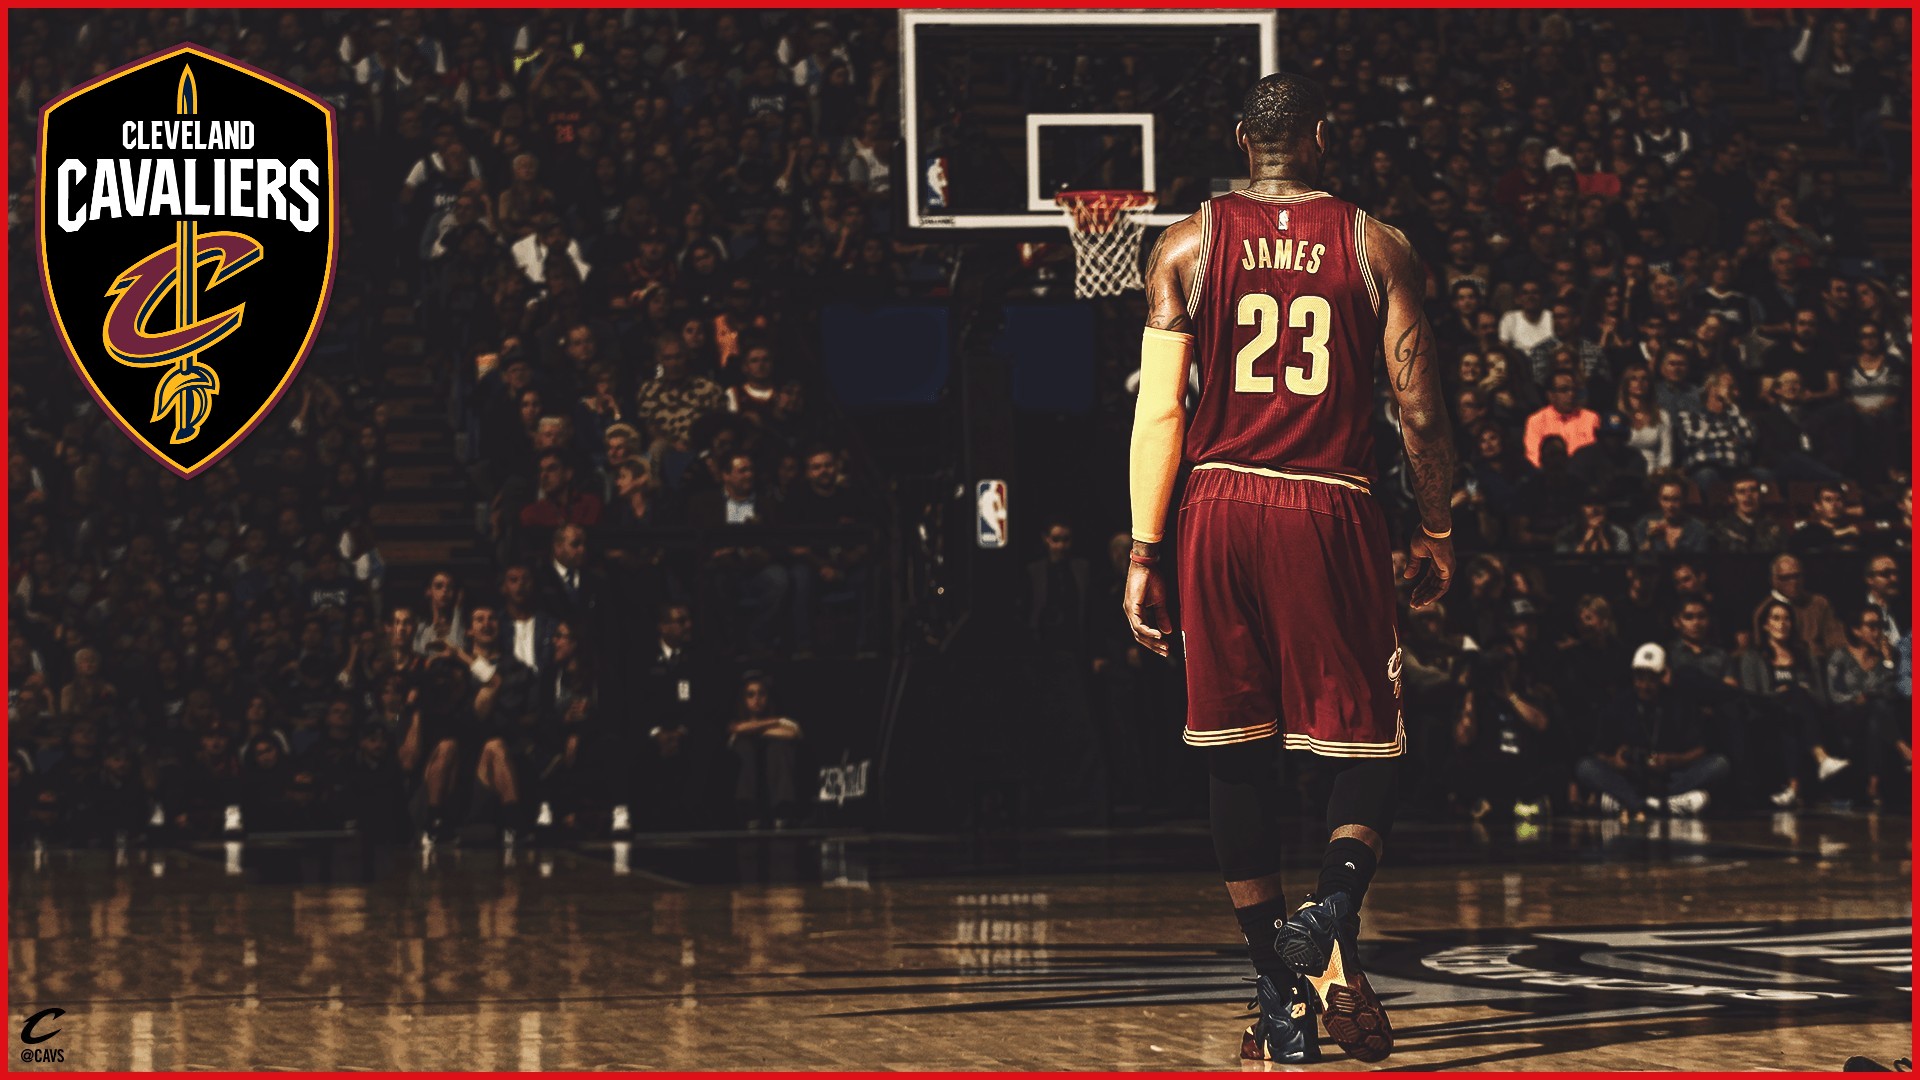 Cavs Wallpaper For Mac Backgrounds 1920x1080